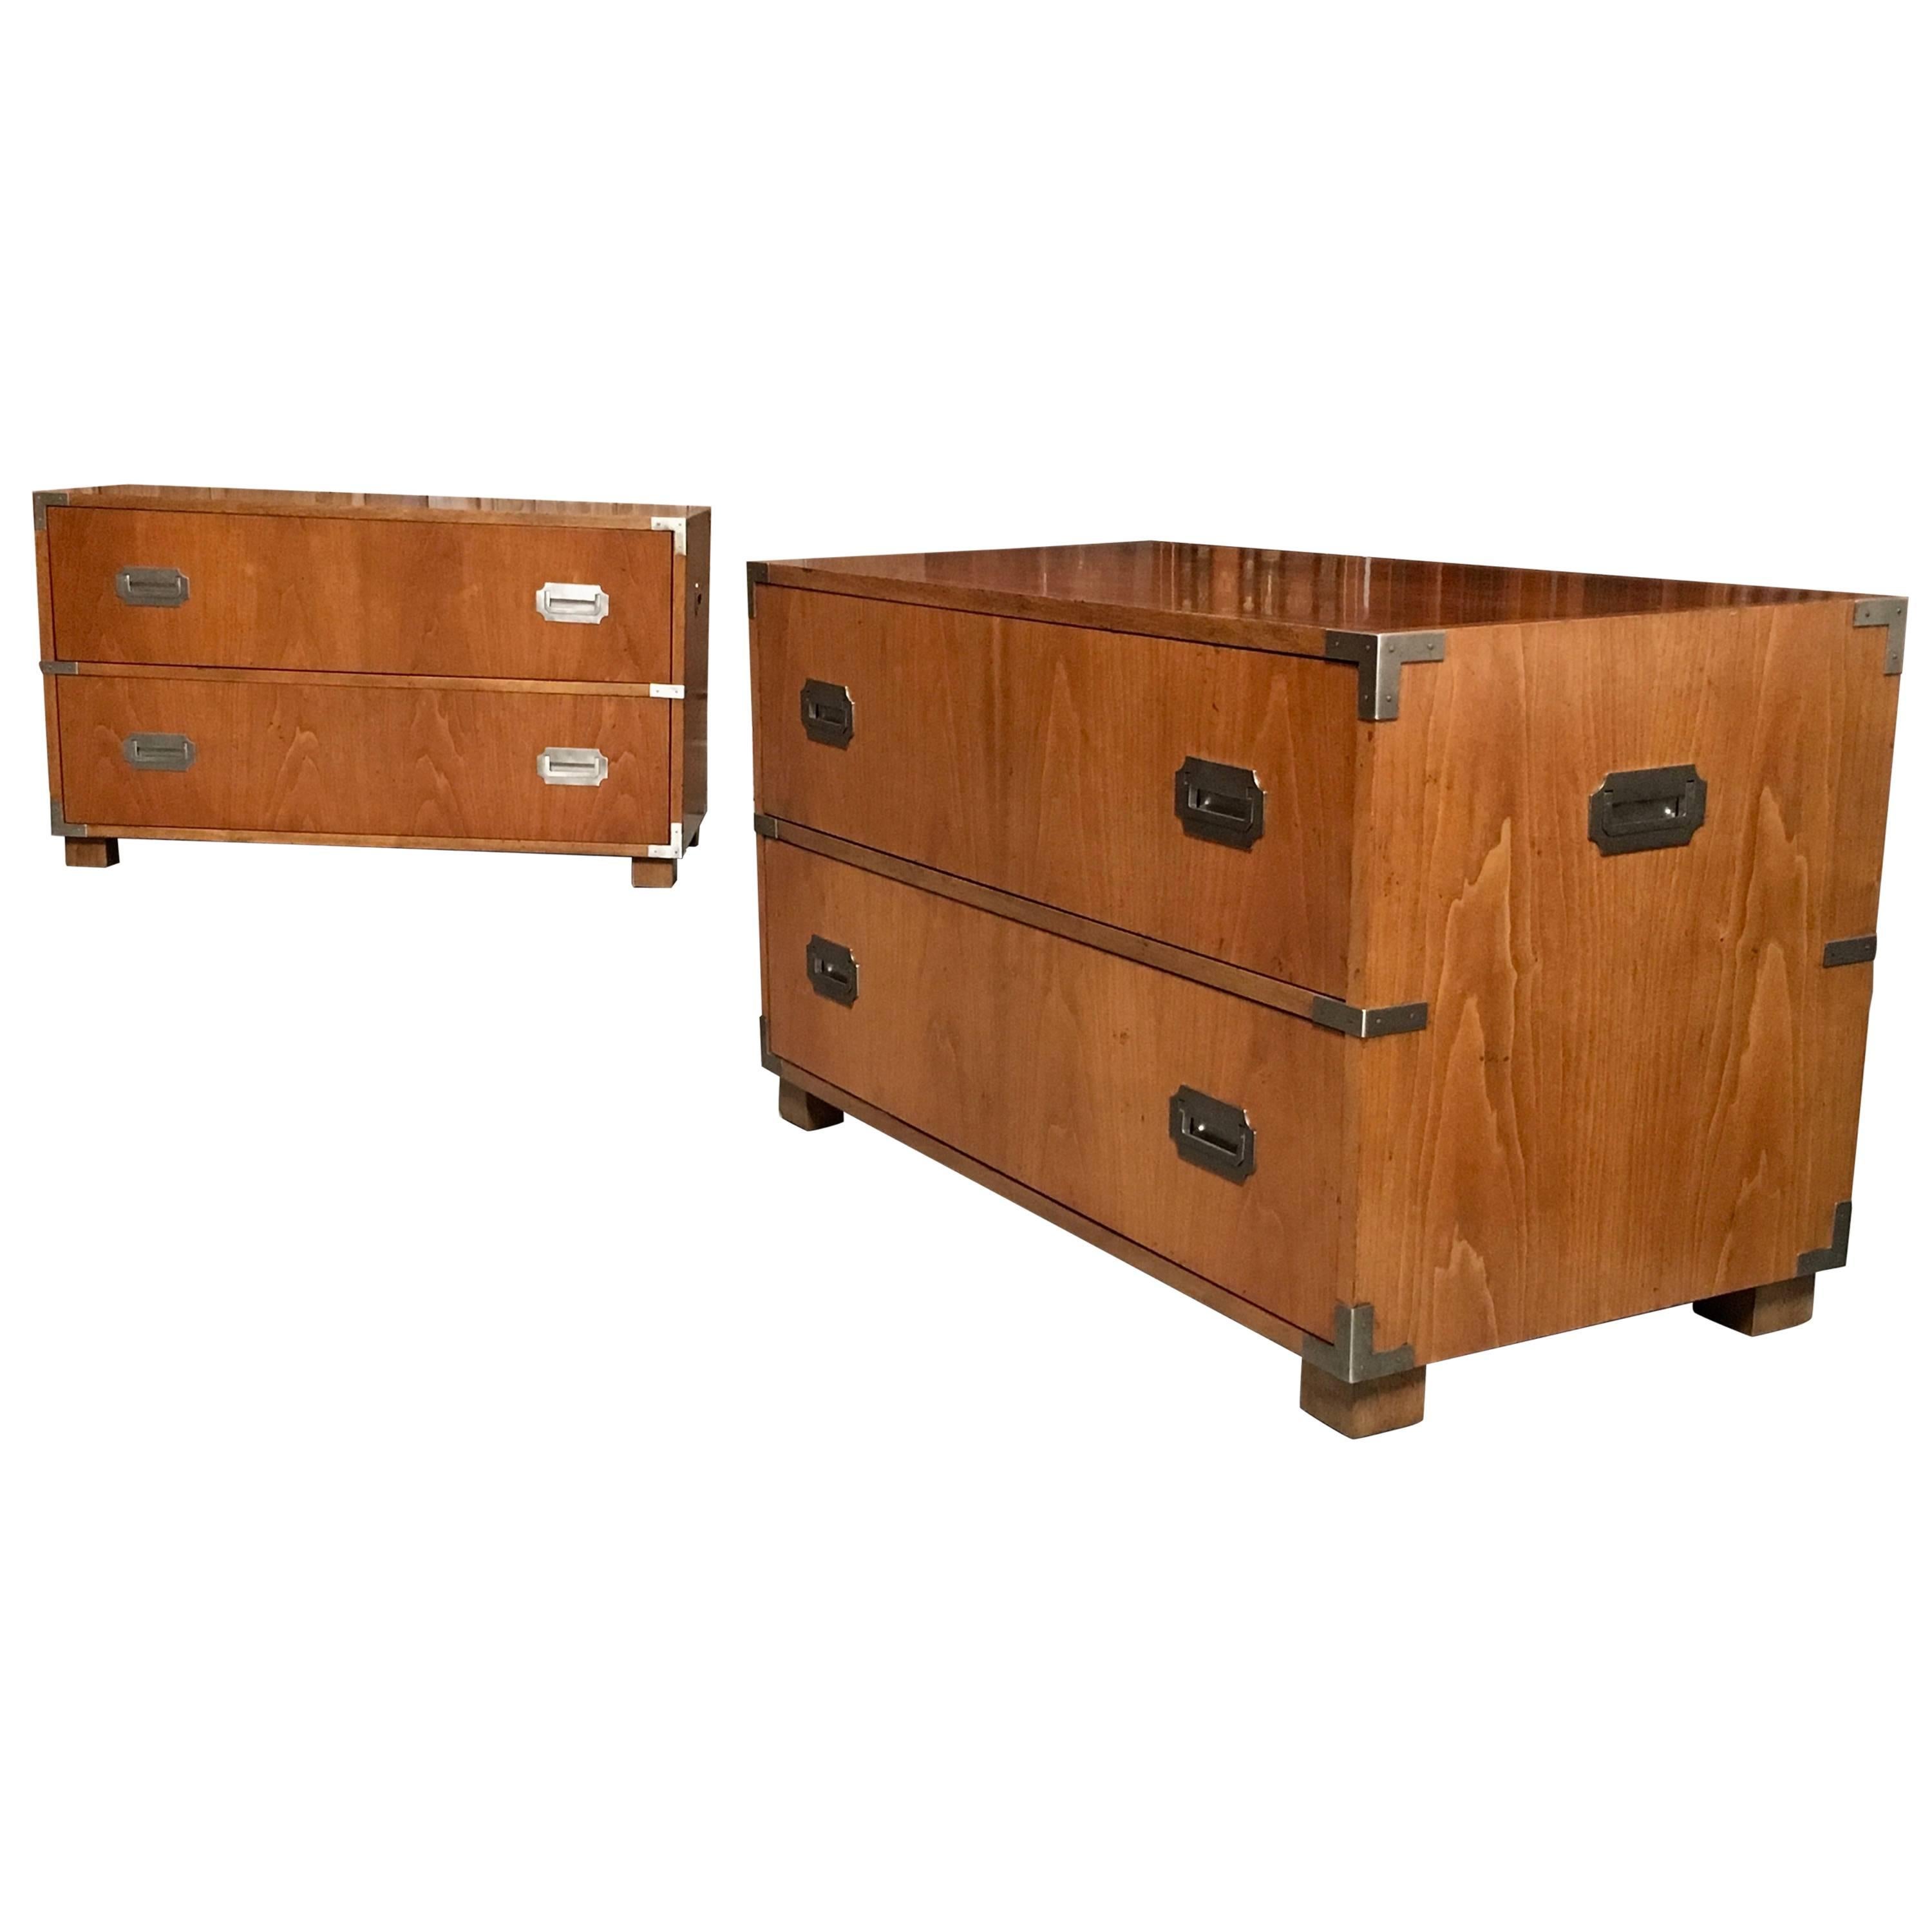 Pair of Baker Campaign Style Two-Drawer Dresser Cabinets